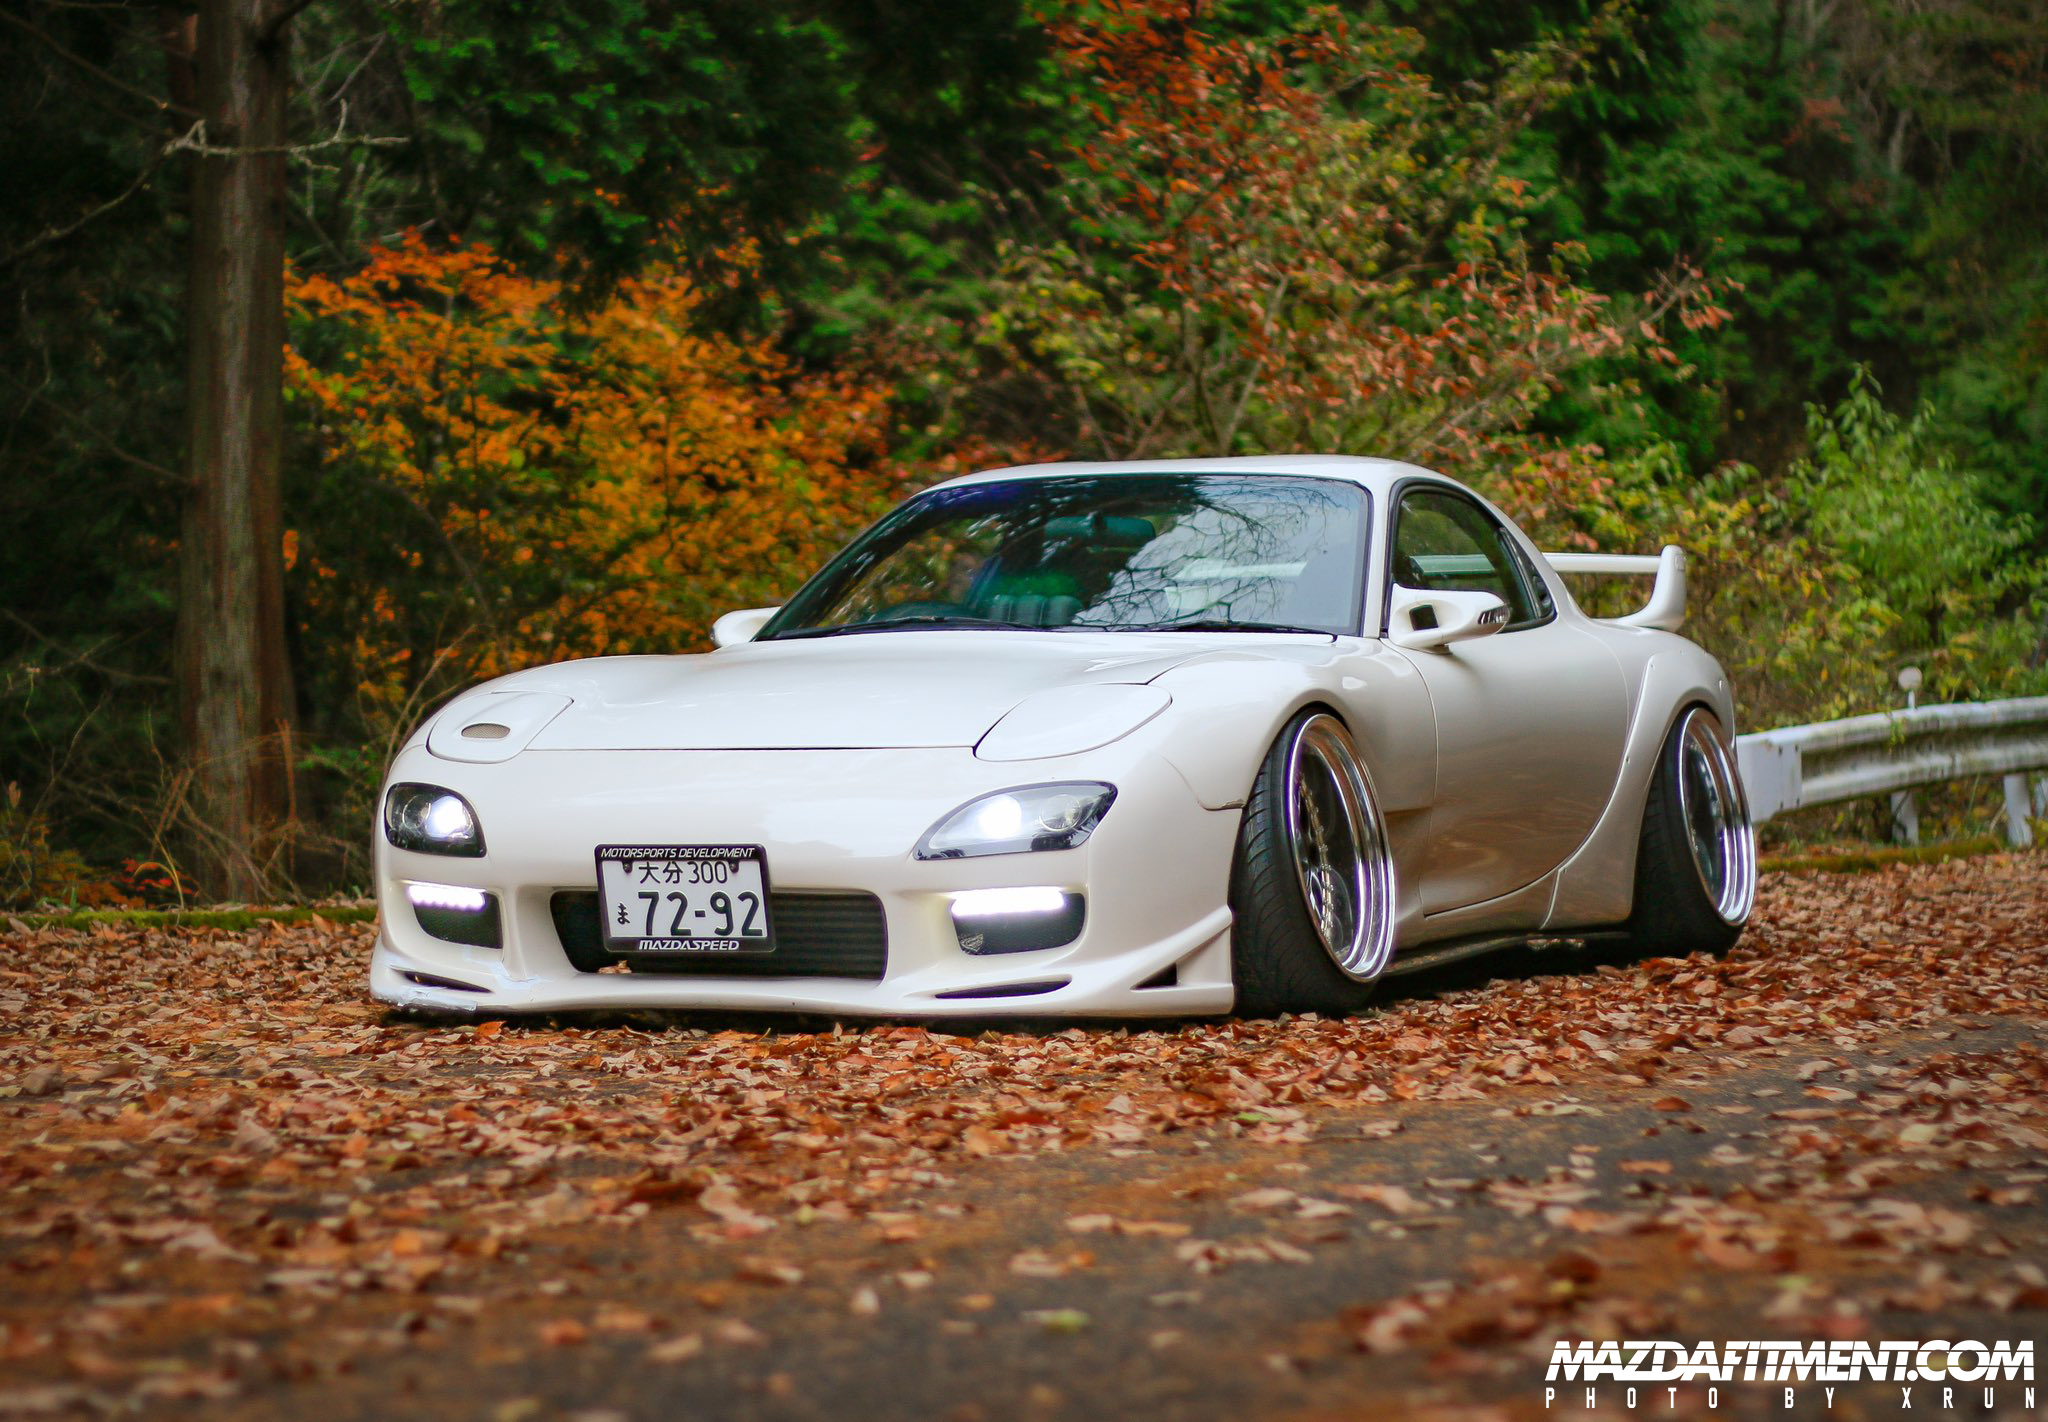 Xrun started his journey to owning the FD3S RX-7 we see today by purchasing...